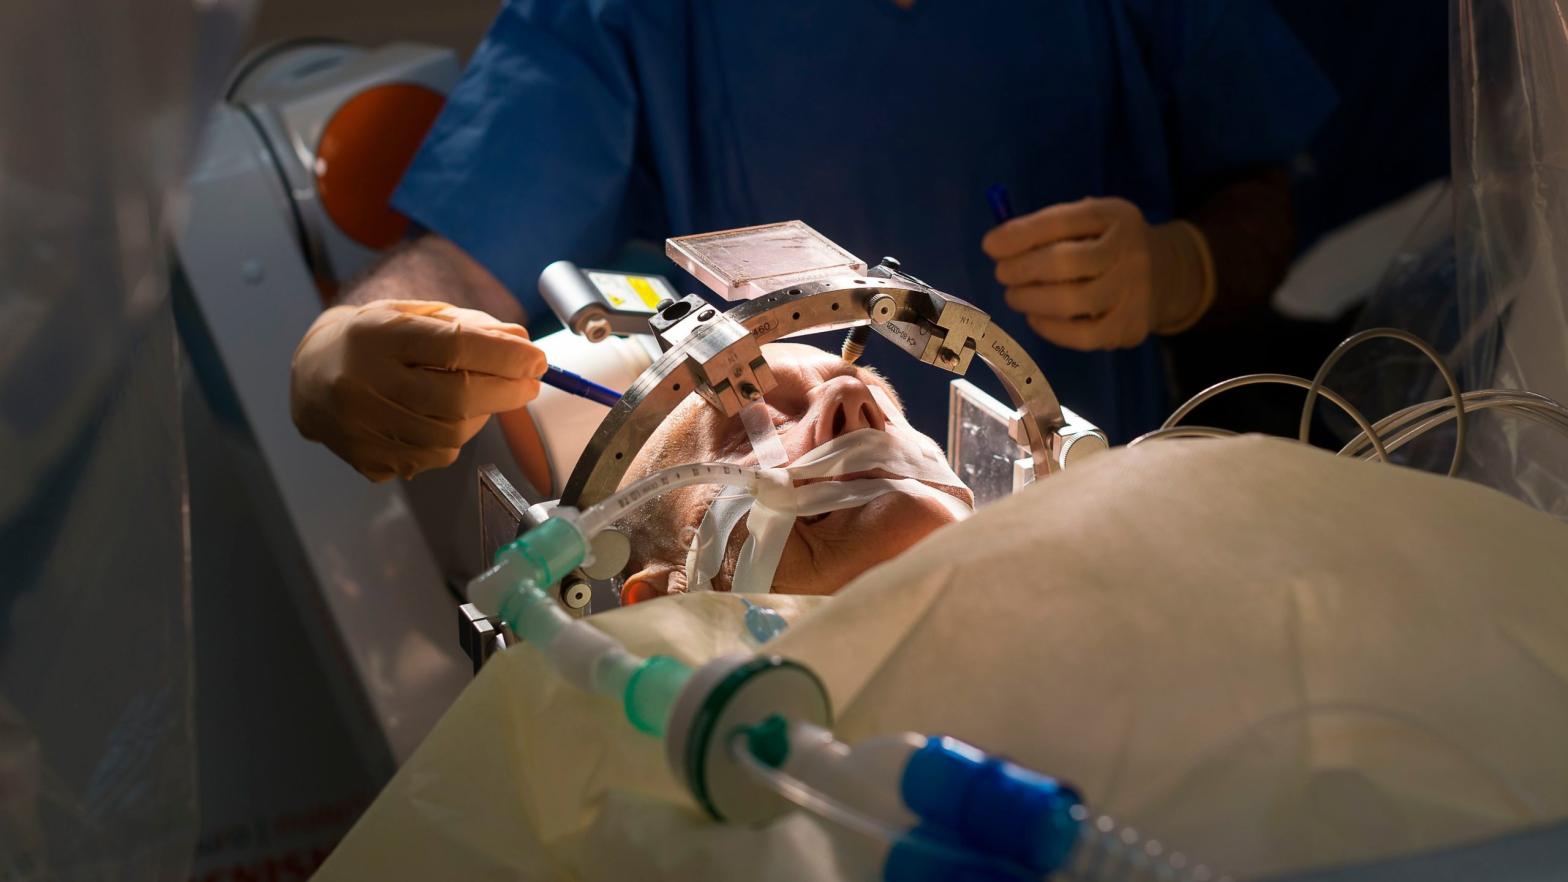 Stereotactic Neurosurgery operation, Pasteur 2 Hospital, Nice, France. A patient with Parkinsons disease is being treated with deep brain stimulation by implanting electrodes in brain and modulating cerebral electrical activity. (Photo: BSIP/Universal Images Group, Getty Images)